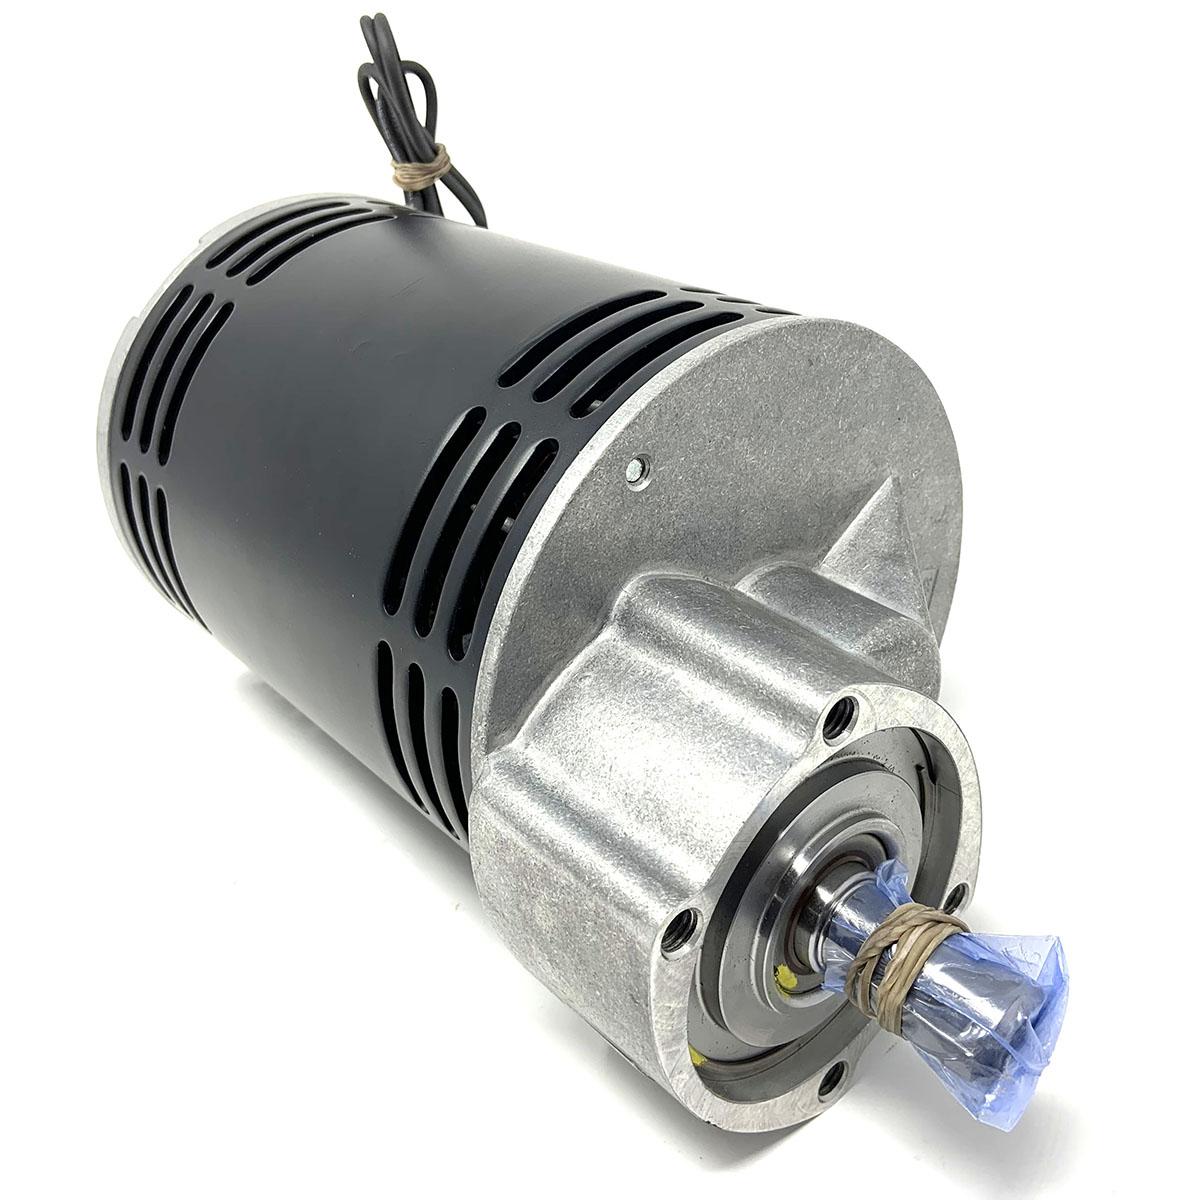 24 Volt Brush Motor With Gearbox Assembly, 220 Rpm 0.75 Hp